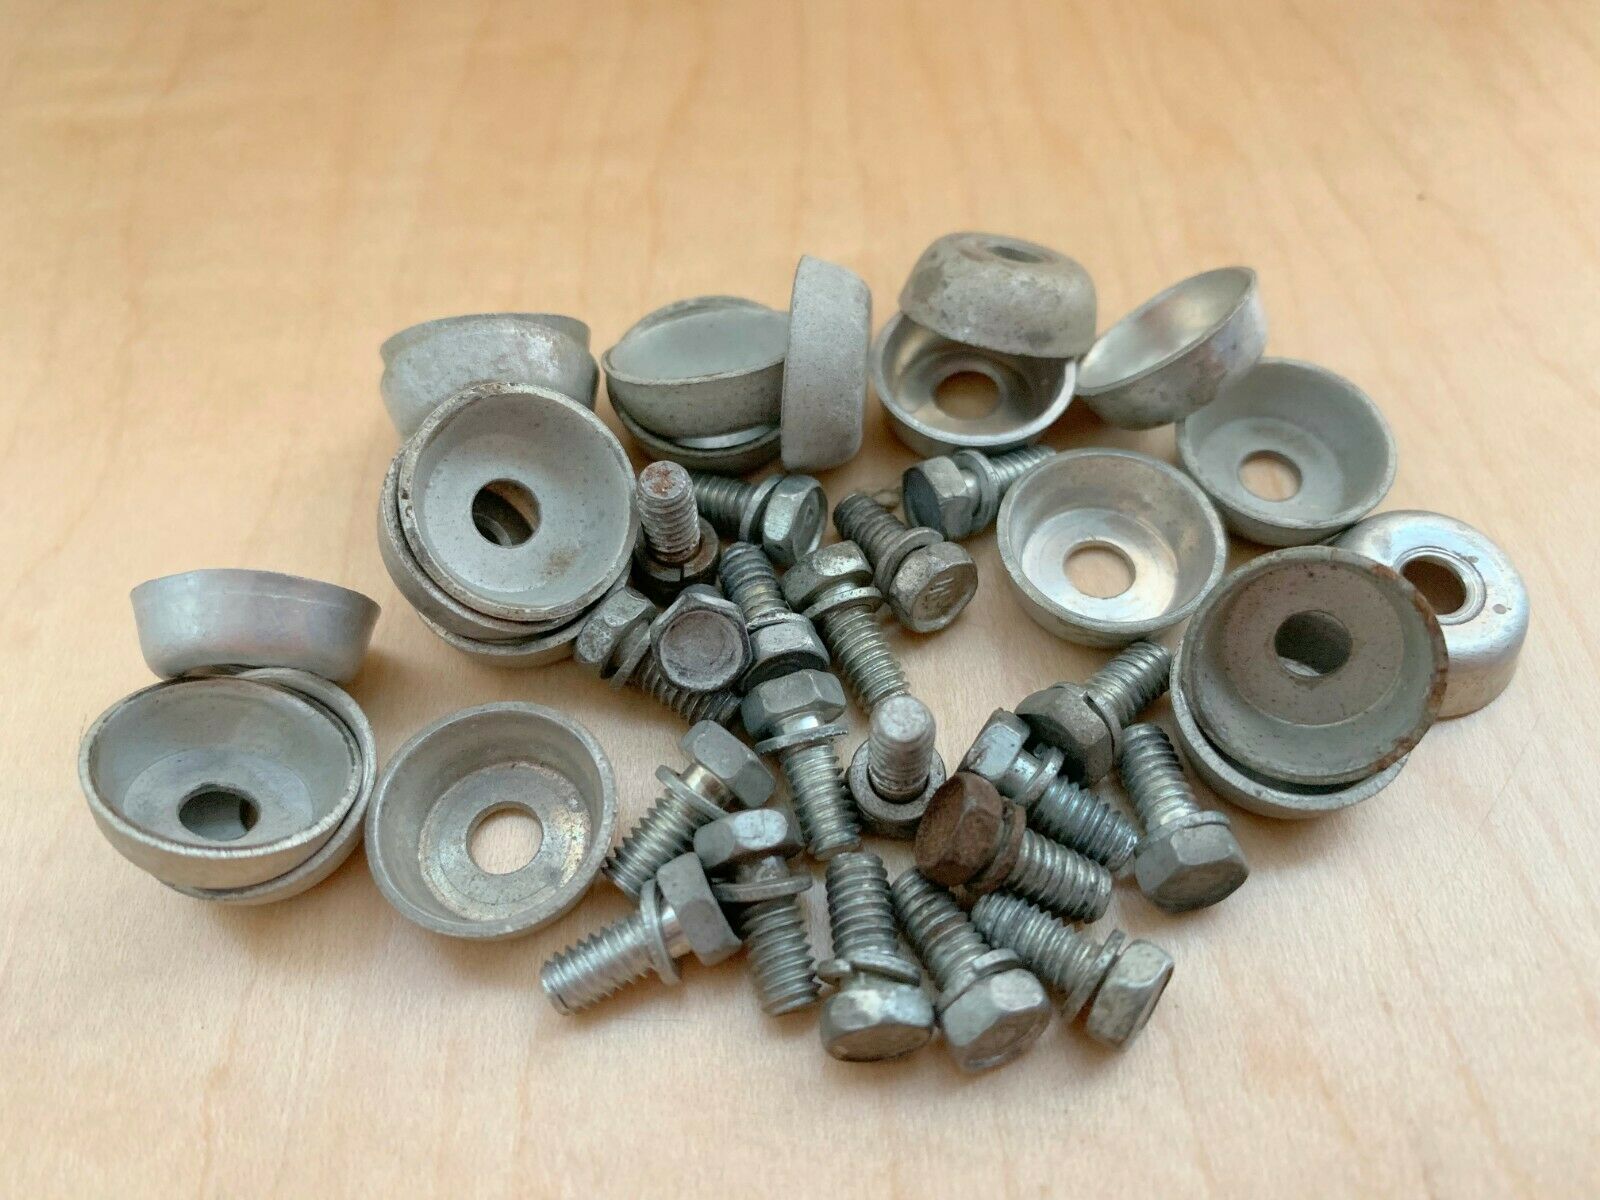 ROGERS 60s 70s Vtg Lug Casing MOUNTING SCREWS STAR WASHER Parts Lot of 40 Swivo 